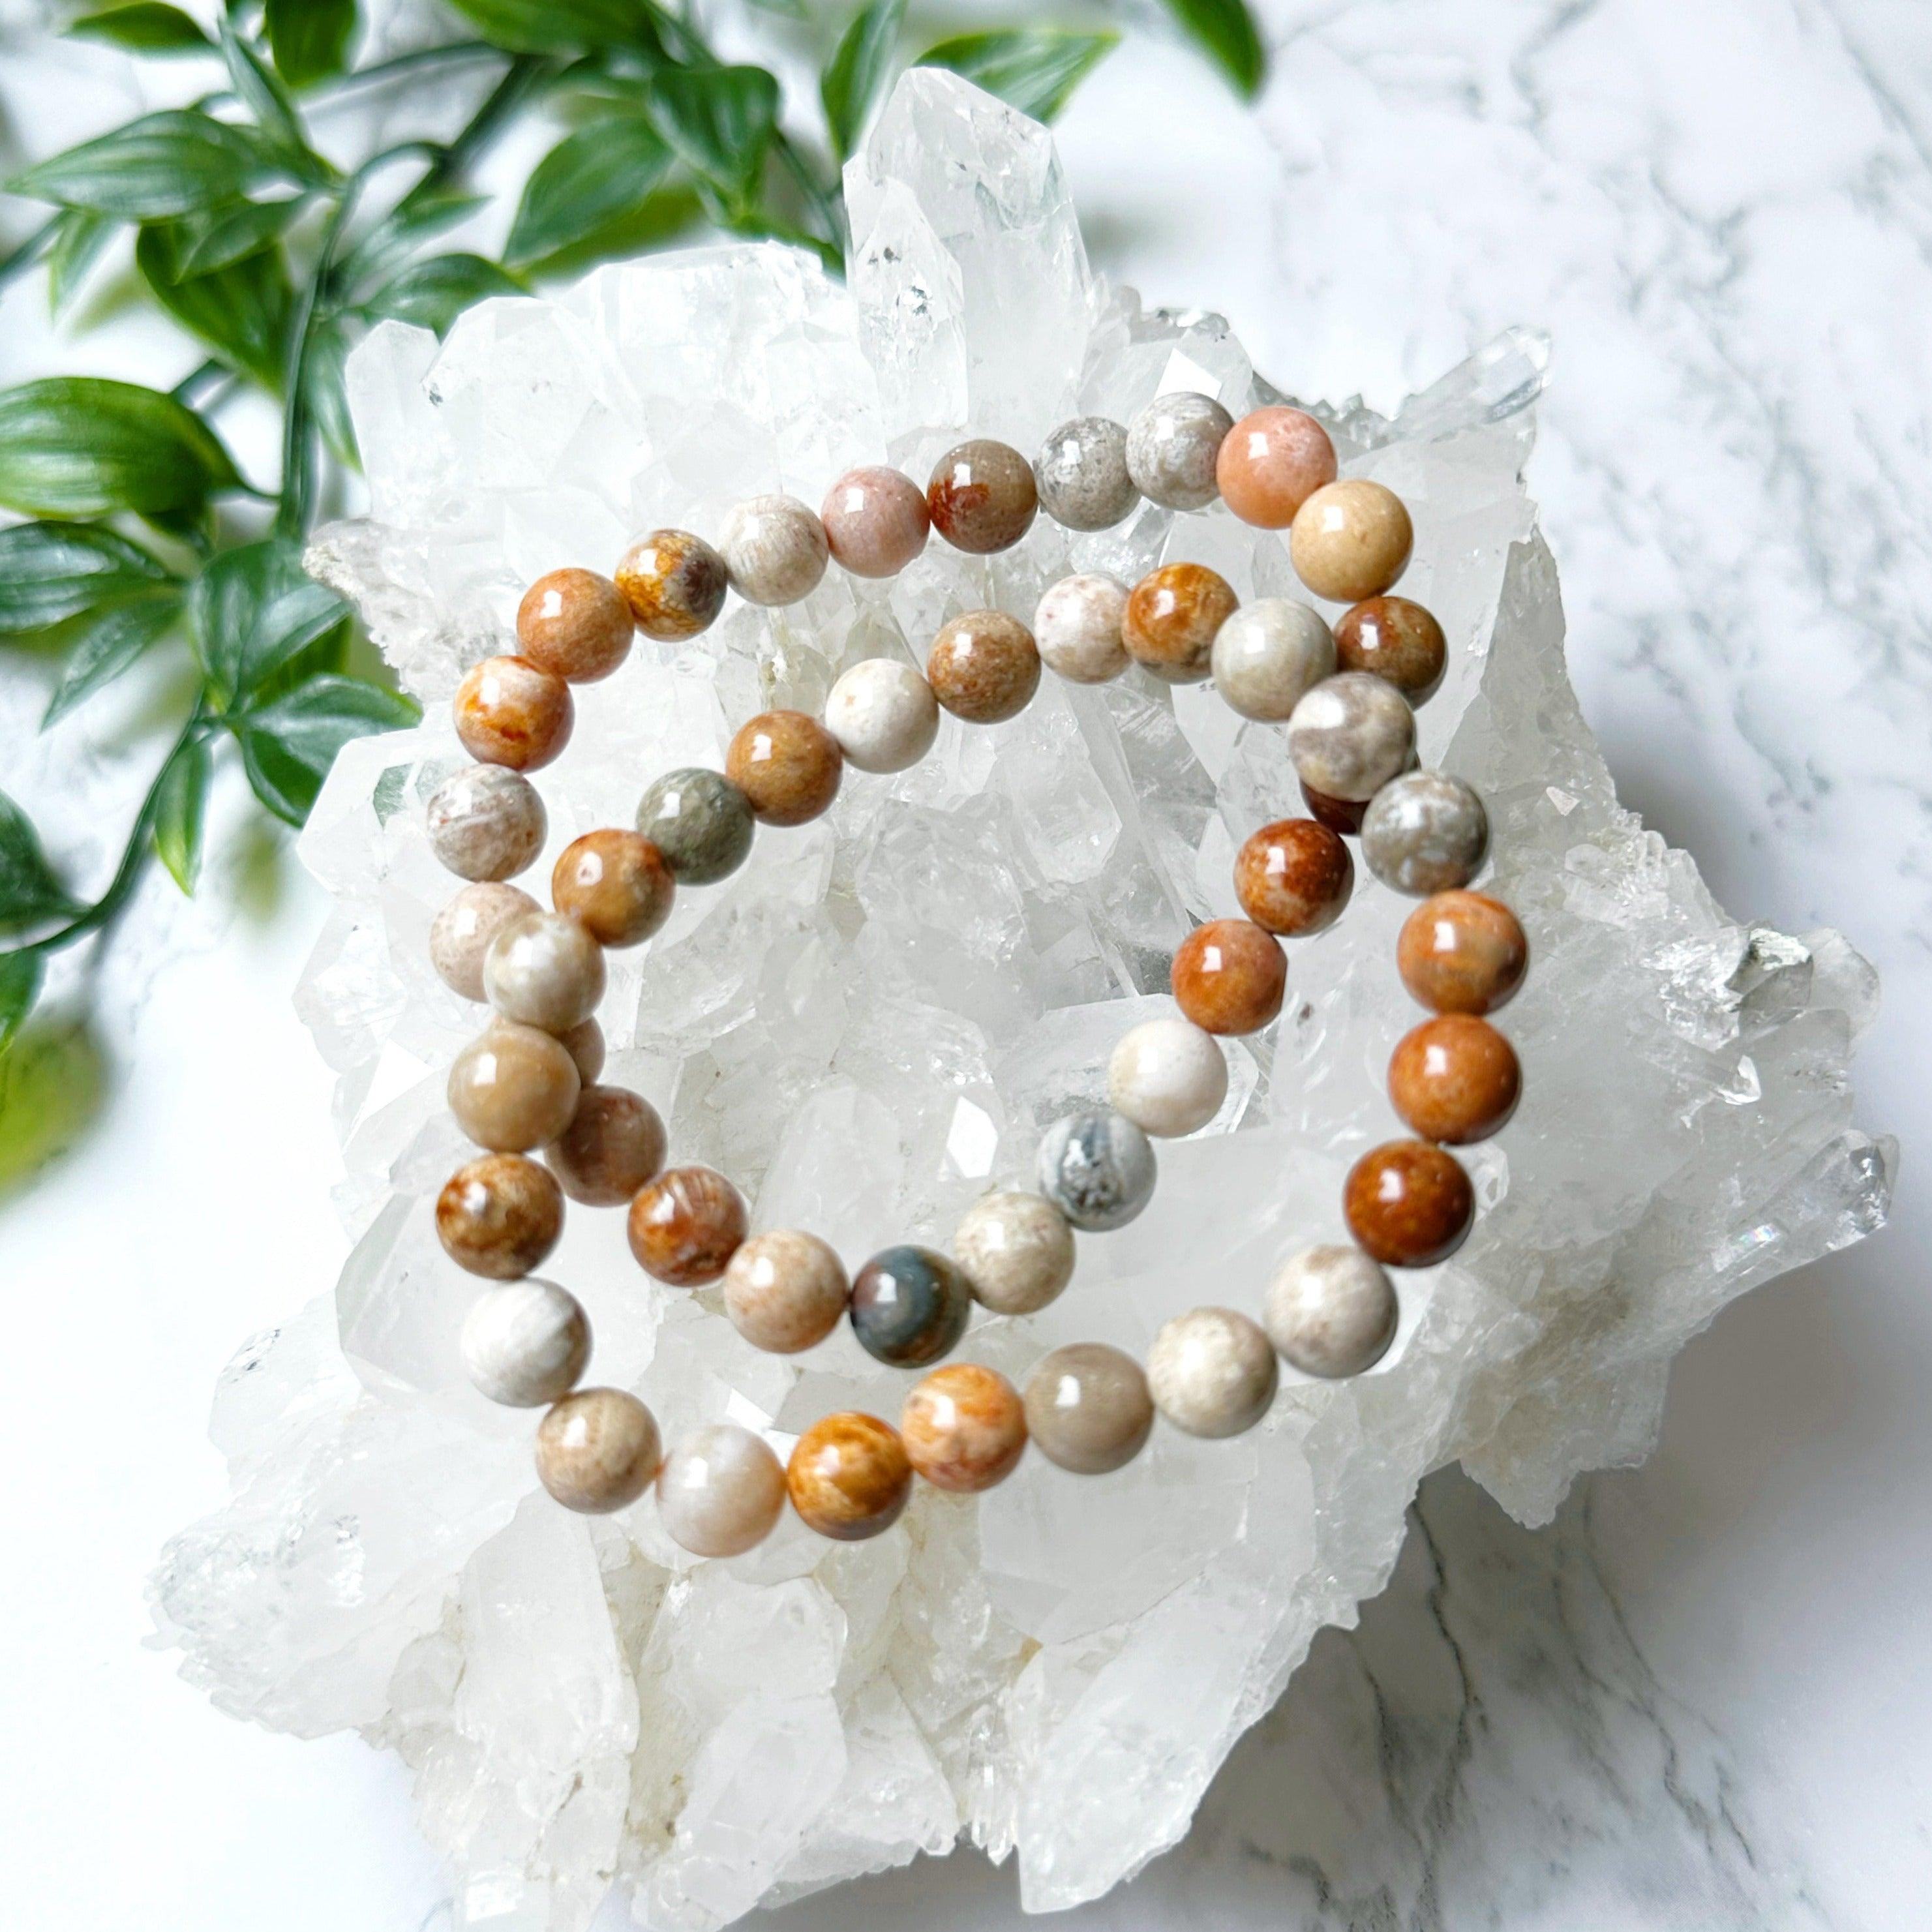 FOSSIL CORAL 8mm - HANDMADE CRYSTAL BRACELET - 8mm, bracelet, crystal bracelet, fossil coral, gemini, gemini stack, handmade bracelet, jewelry, june wrist candy, market bracelet, mixed colors, recently added, scorpio, scorpio stack, summer wrist candy, water, Wearable - The Mineral Maven